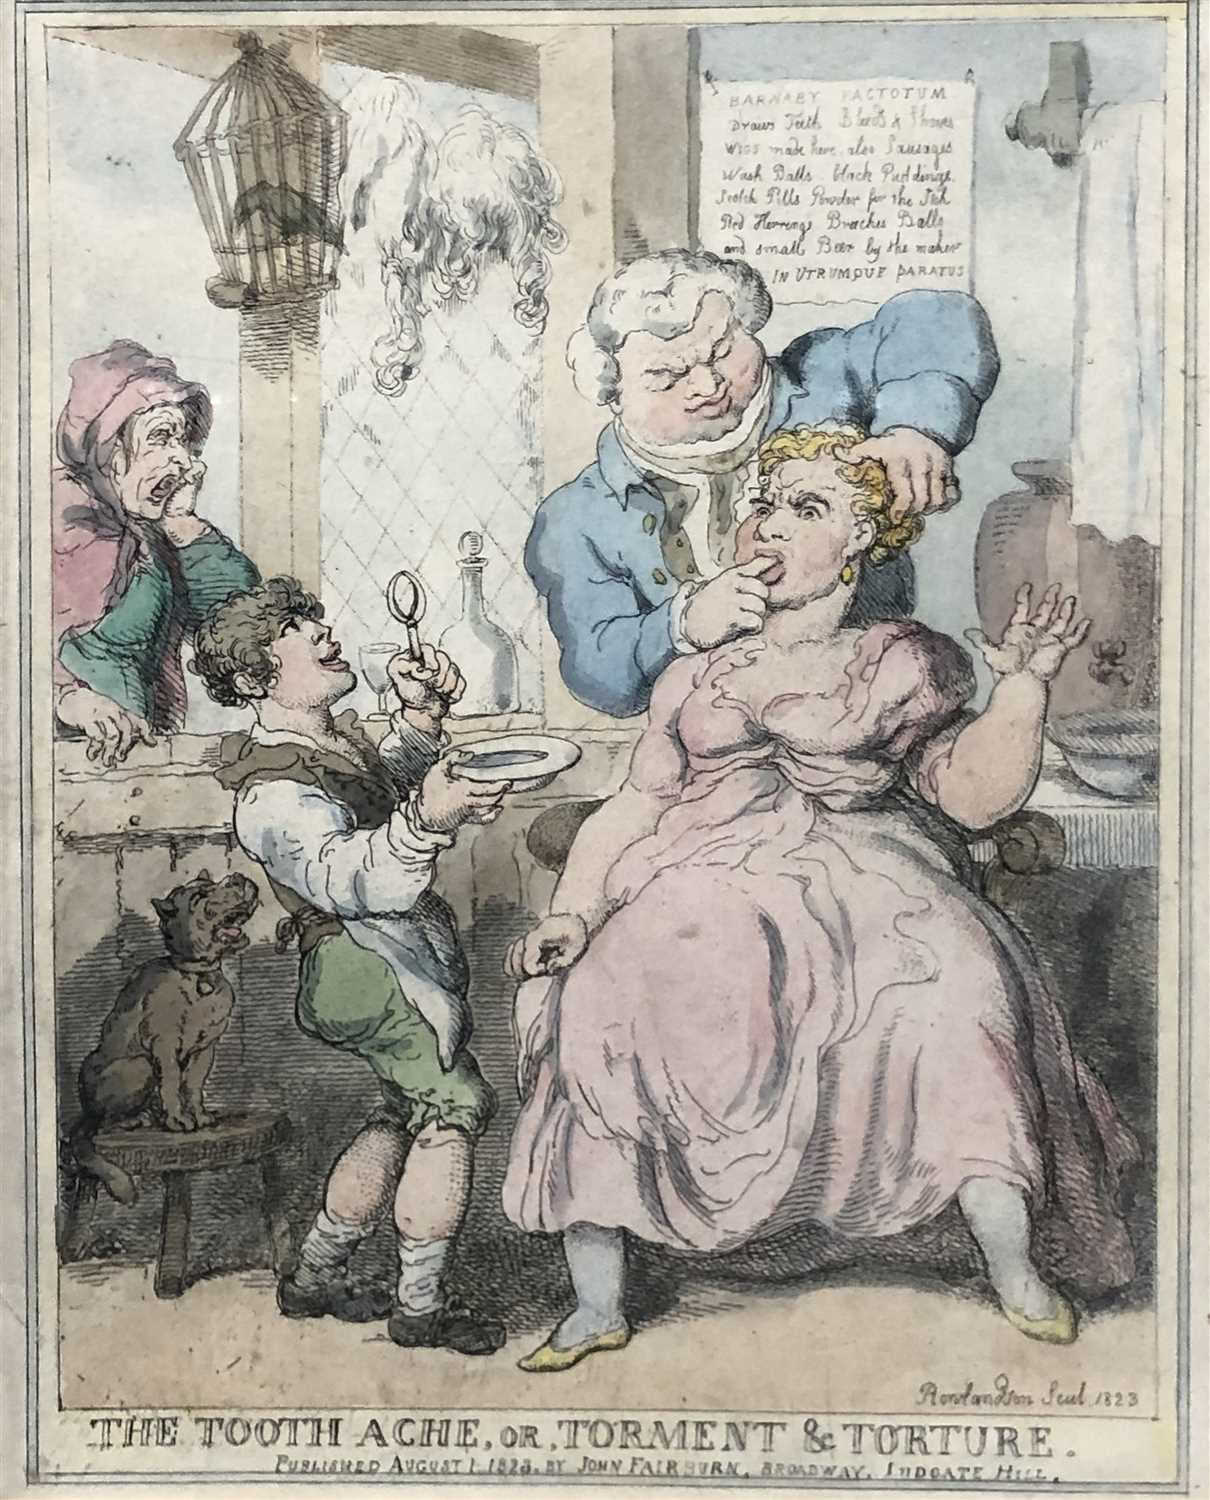 Lot 252 - After Thomas Rowlandson, "The Tooth Ache", hand-coloured etching, 25.5cm x 19.5cm.